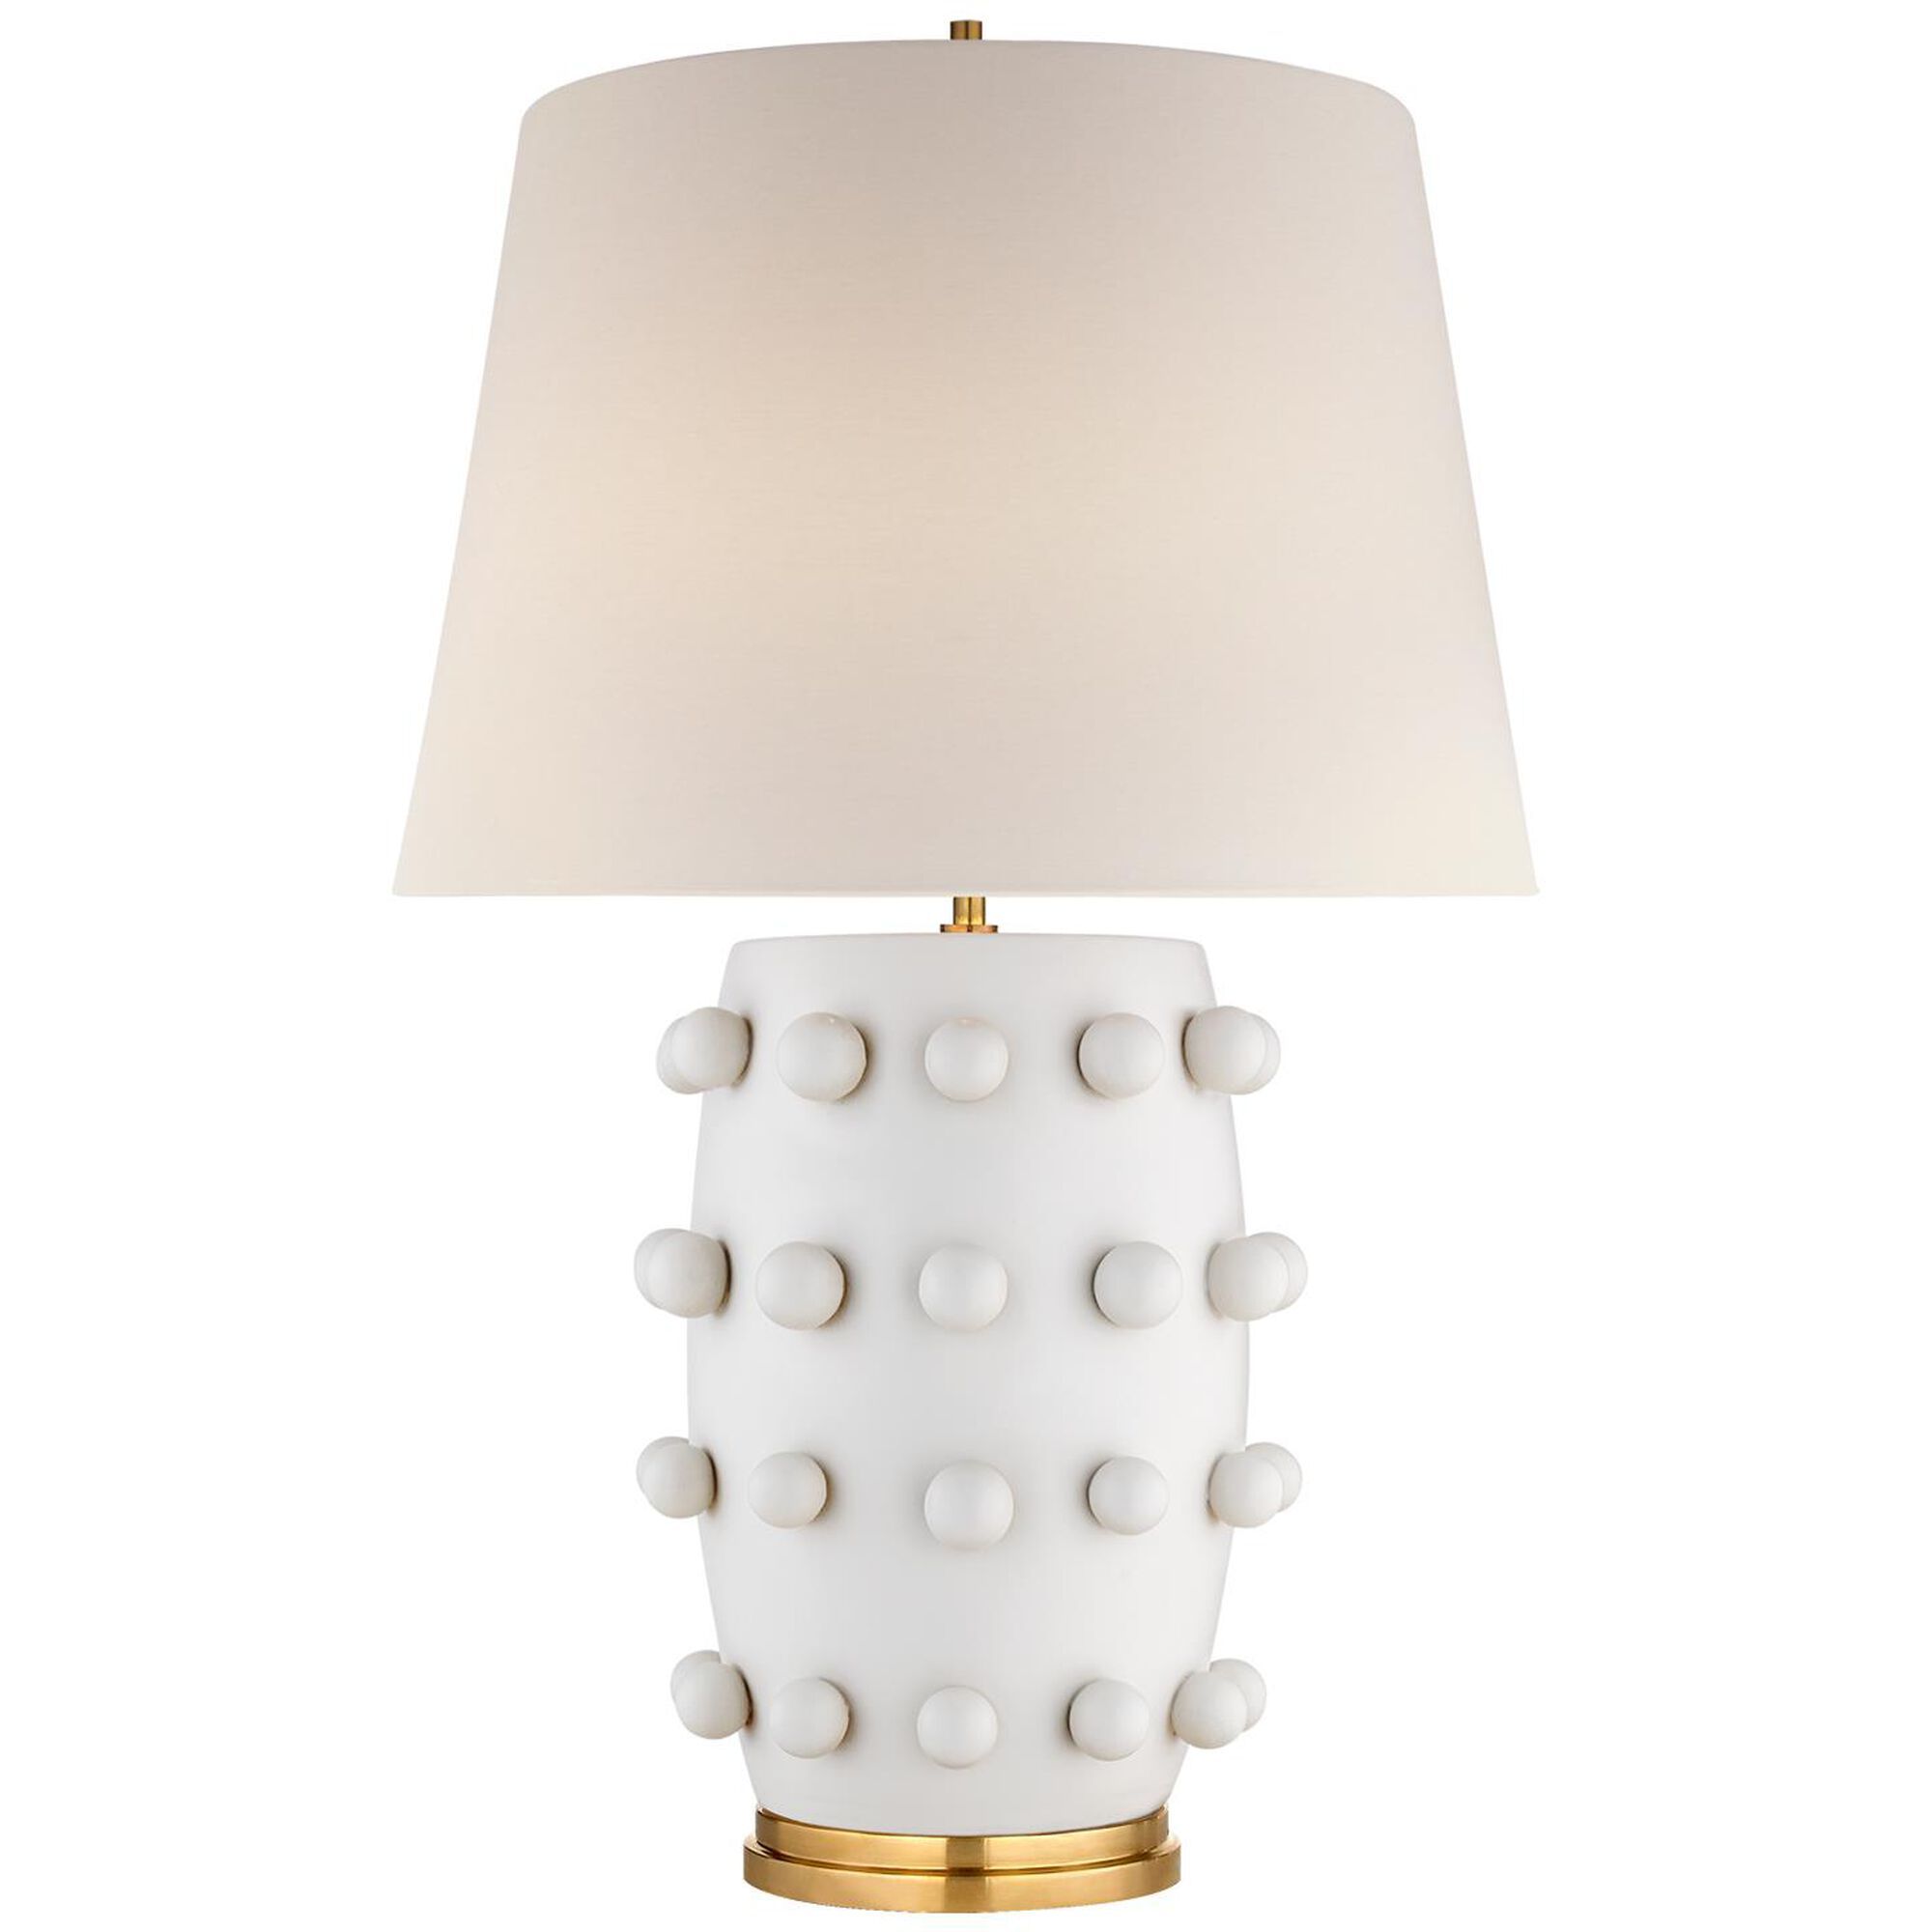 New


Kelly Wearstler Linden 26 Inch Table Lamp by Visual Comfort and Co.

Capitol ID: 2272166
MF... | 1800 Lighting